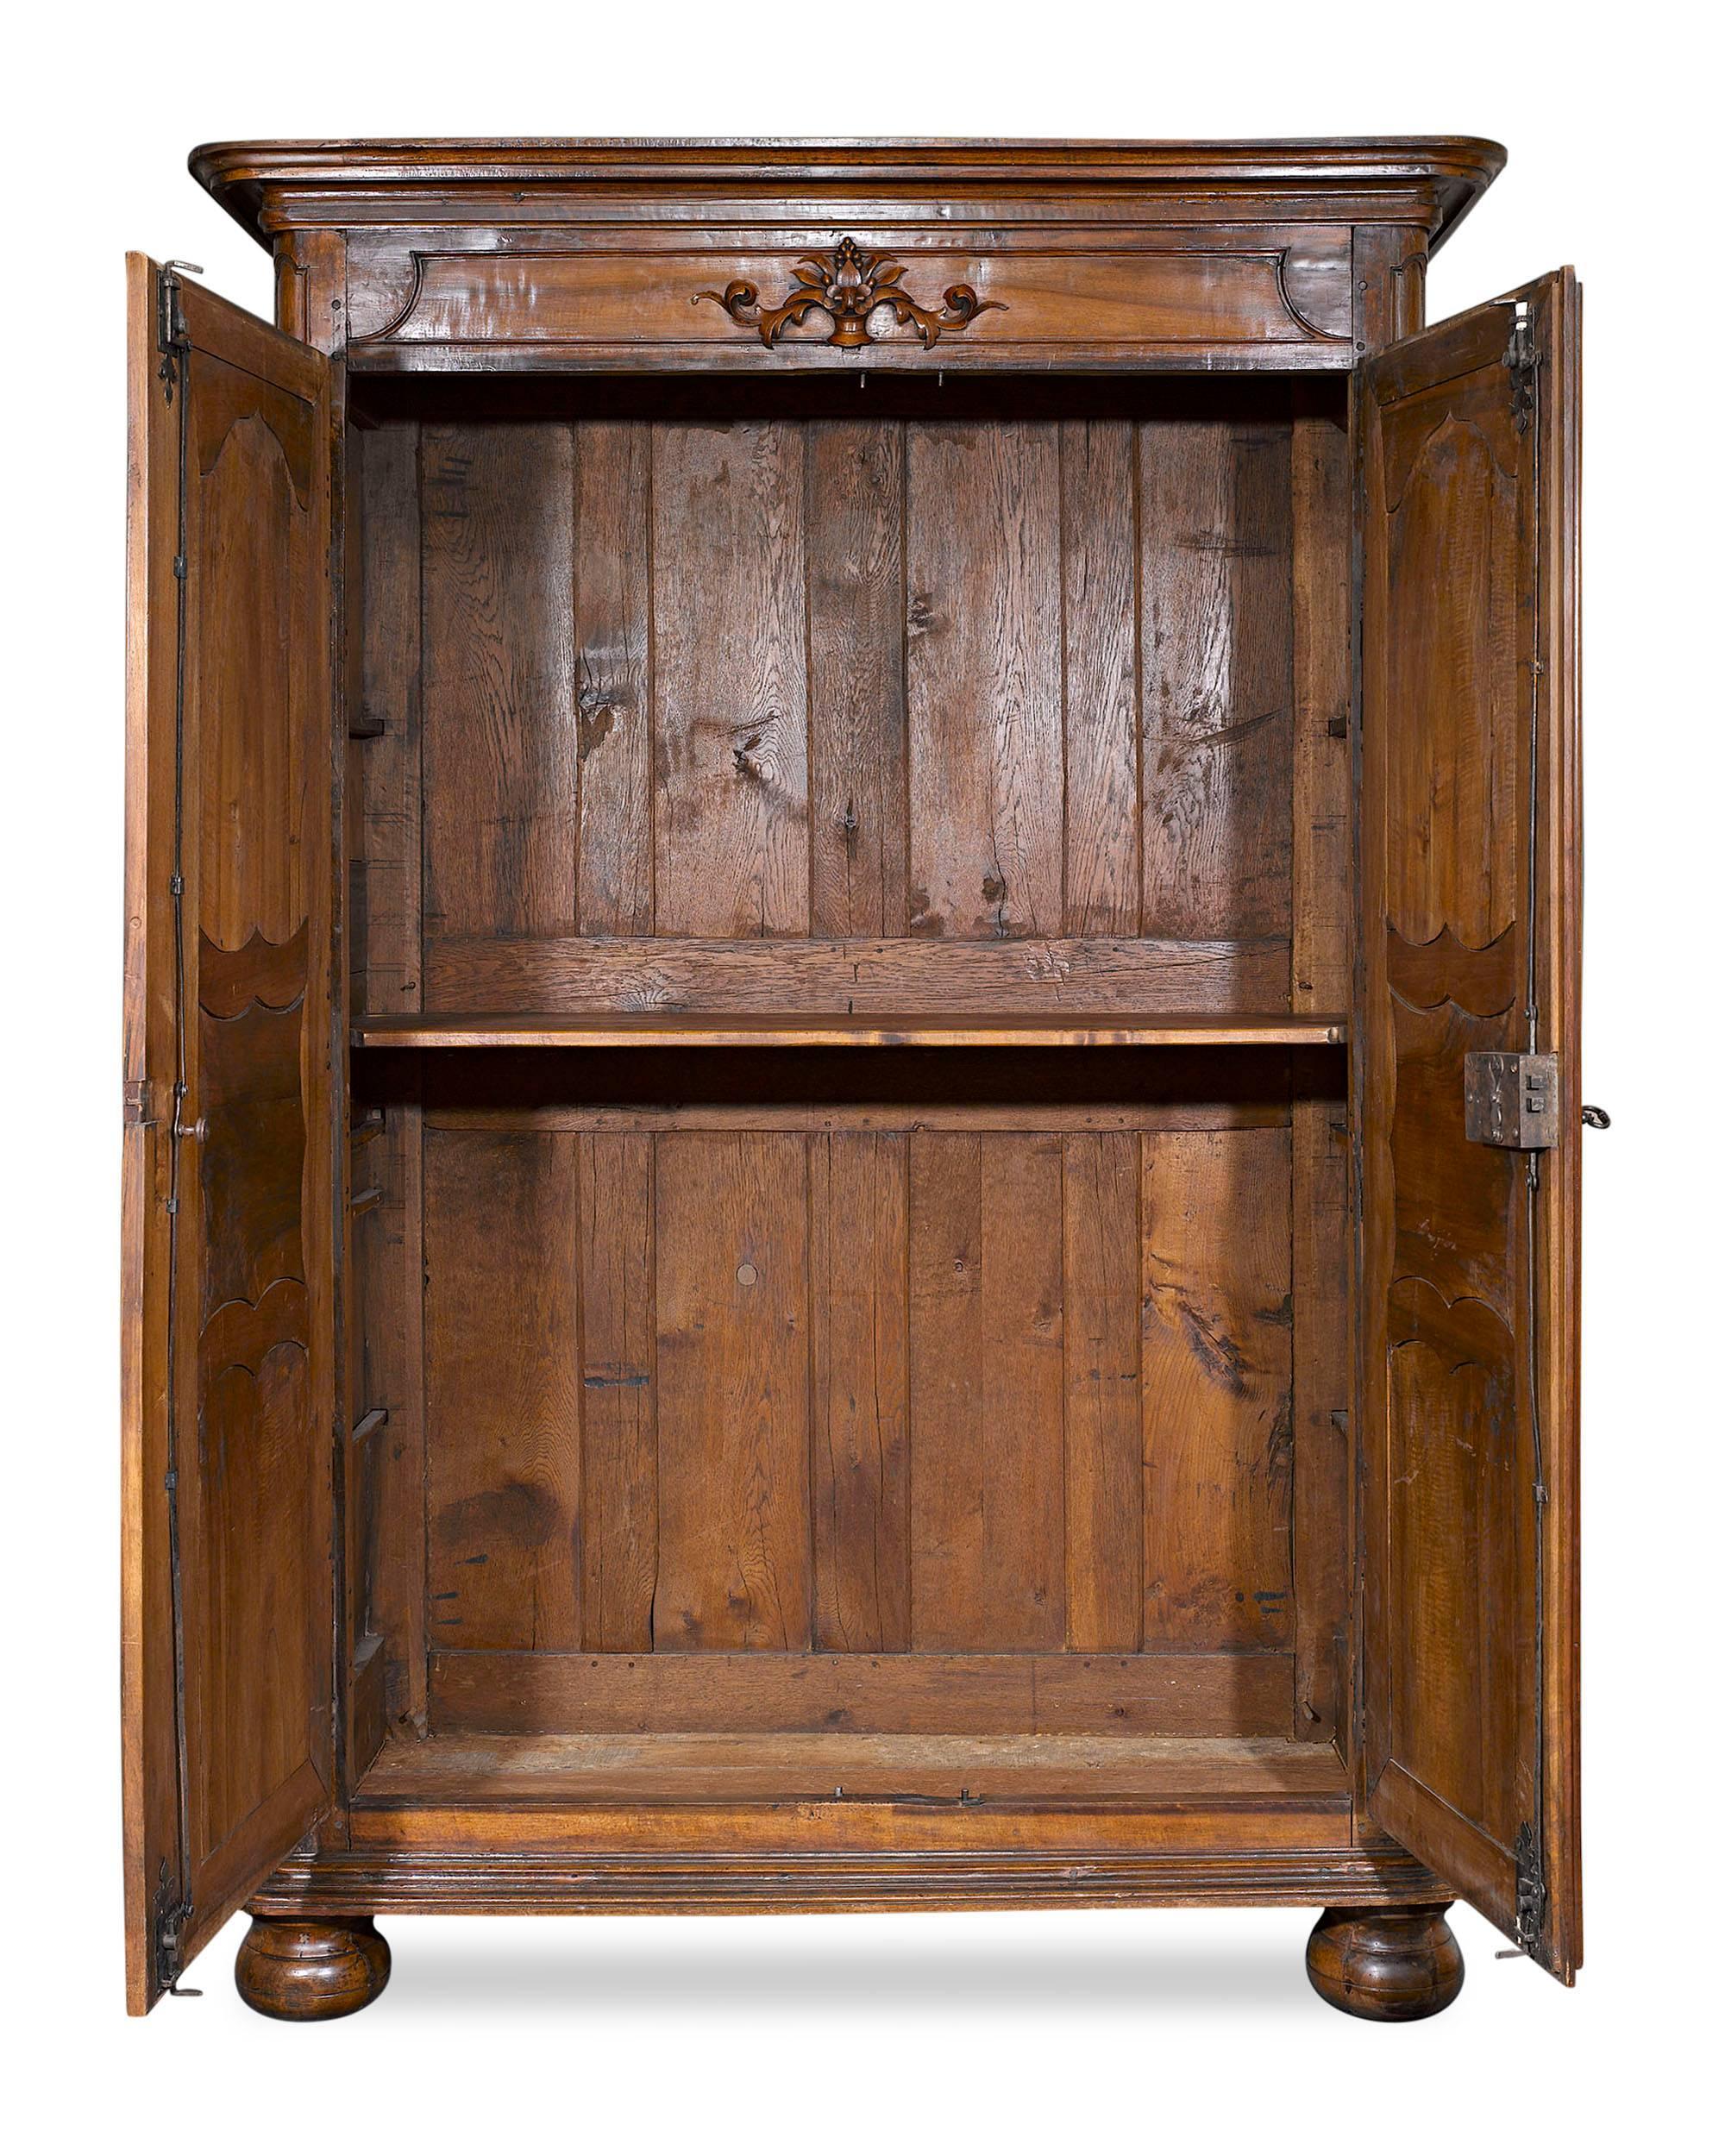 This fine French provincial double door armoire is beautifully crafted of fine walnut. Adorned with elegant, Rococo-inspired molding and featuring exceptional well-preserved, original hardware, this armoire provides ample storage space. The first